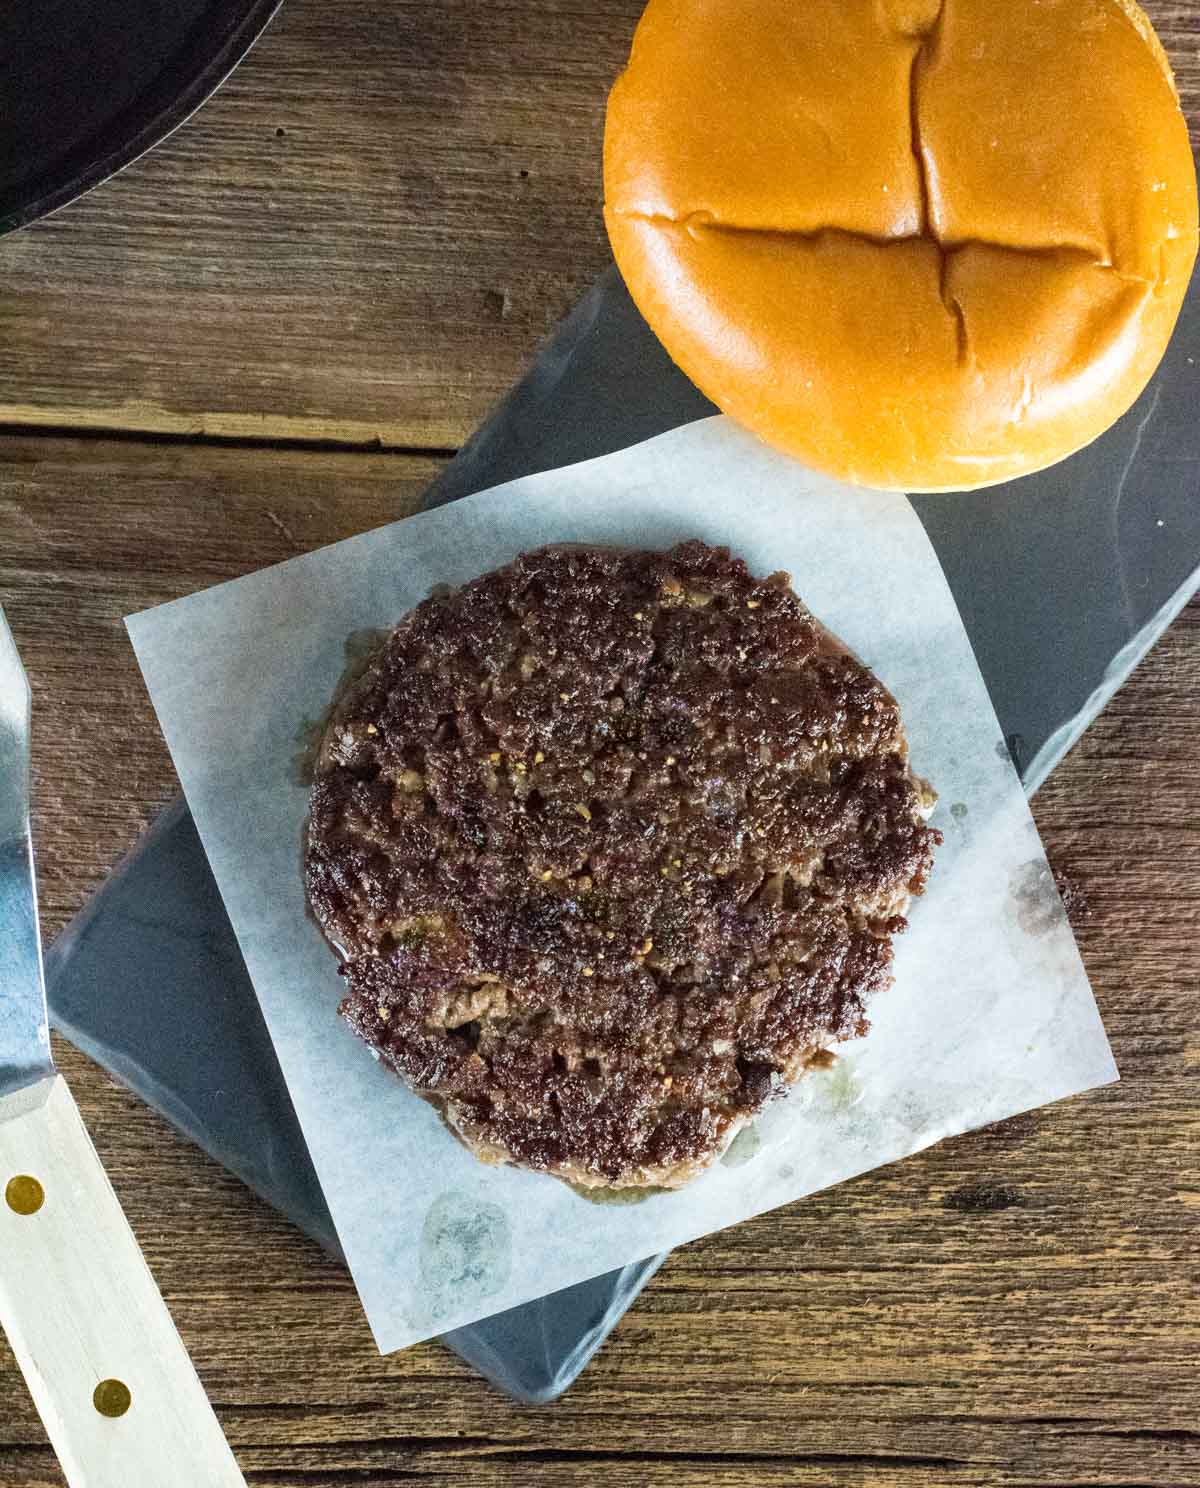 Cooked blended burger patty on wax paper.